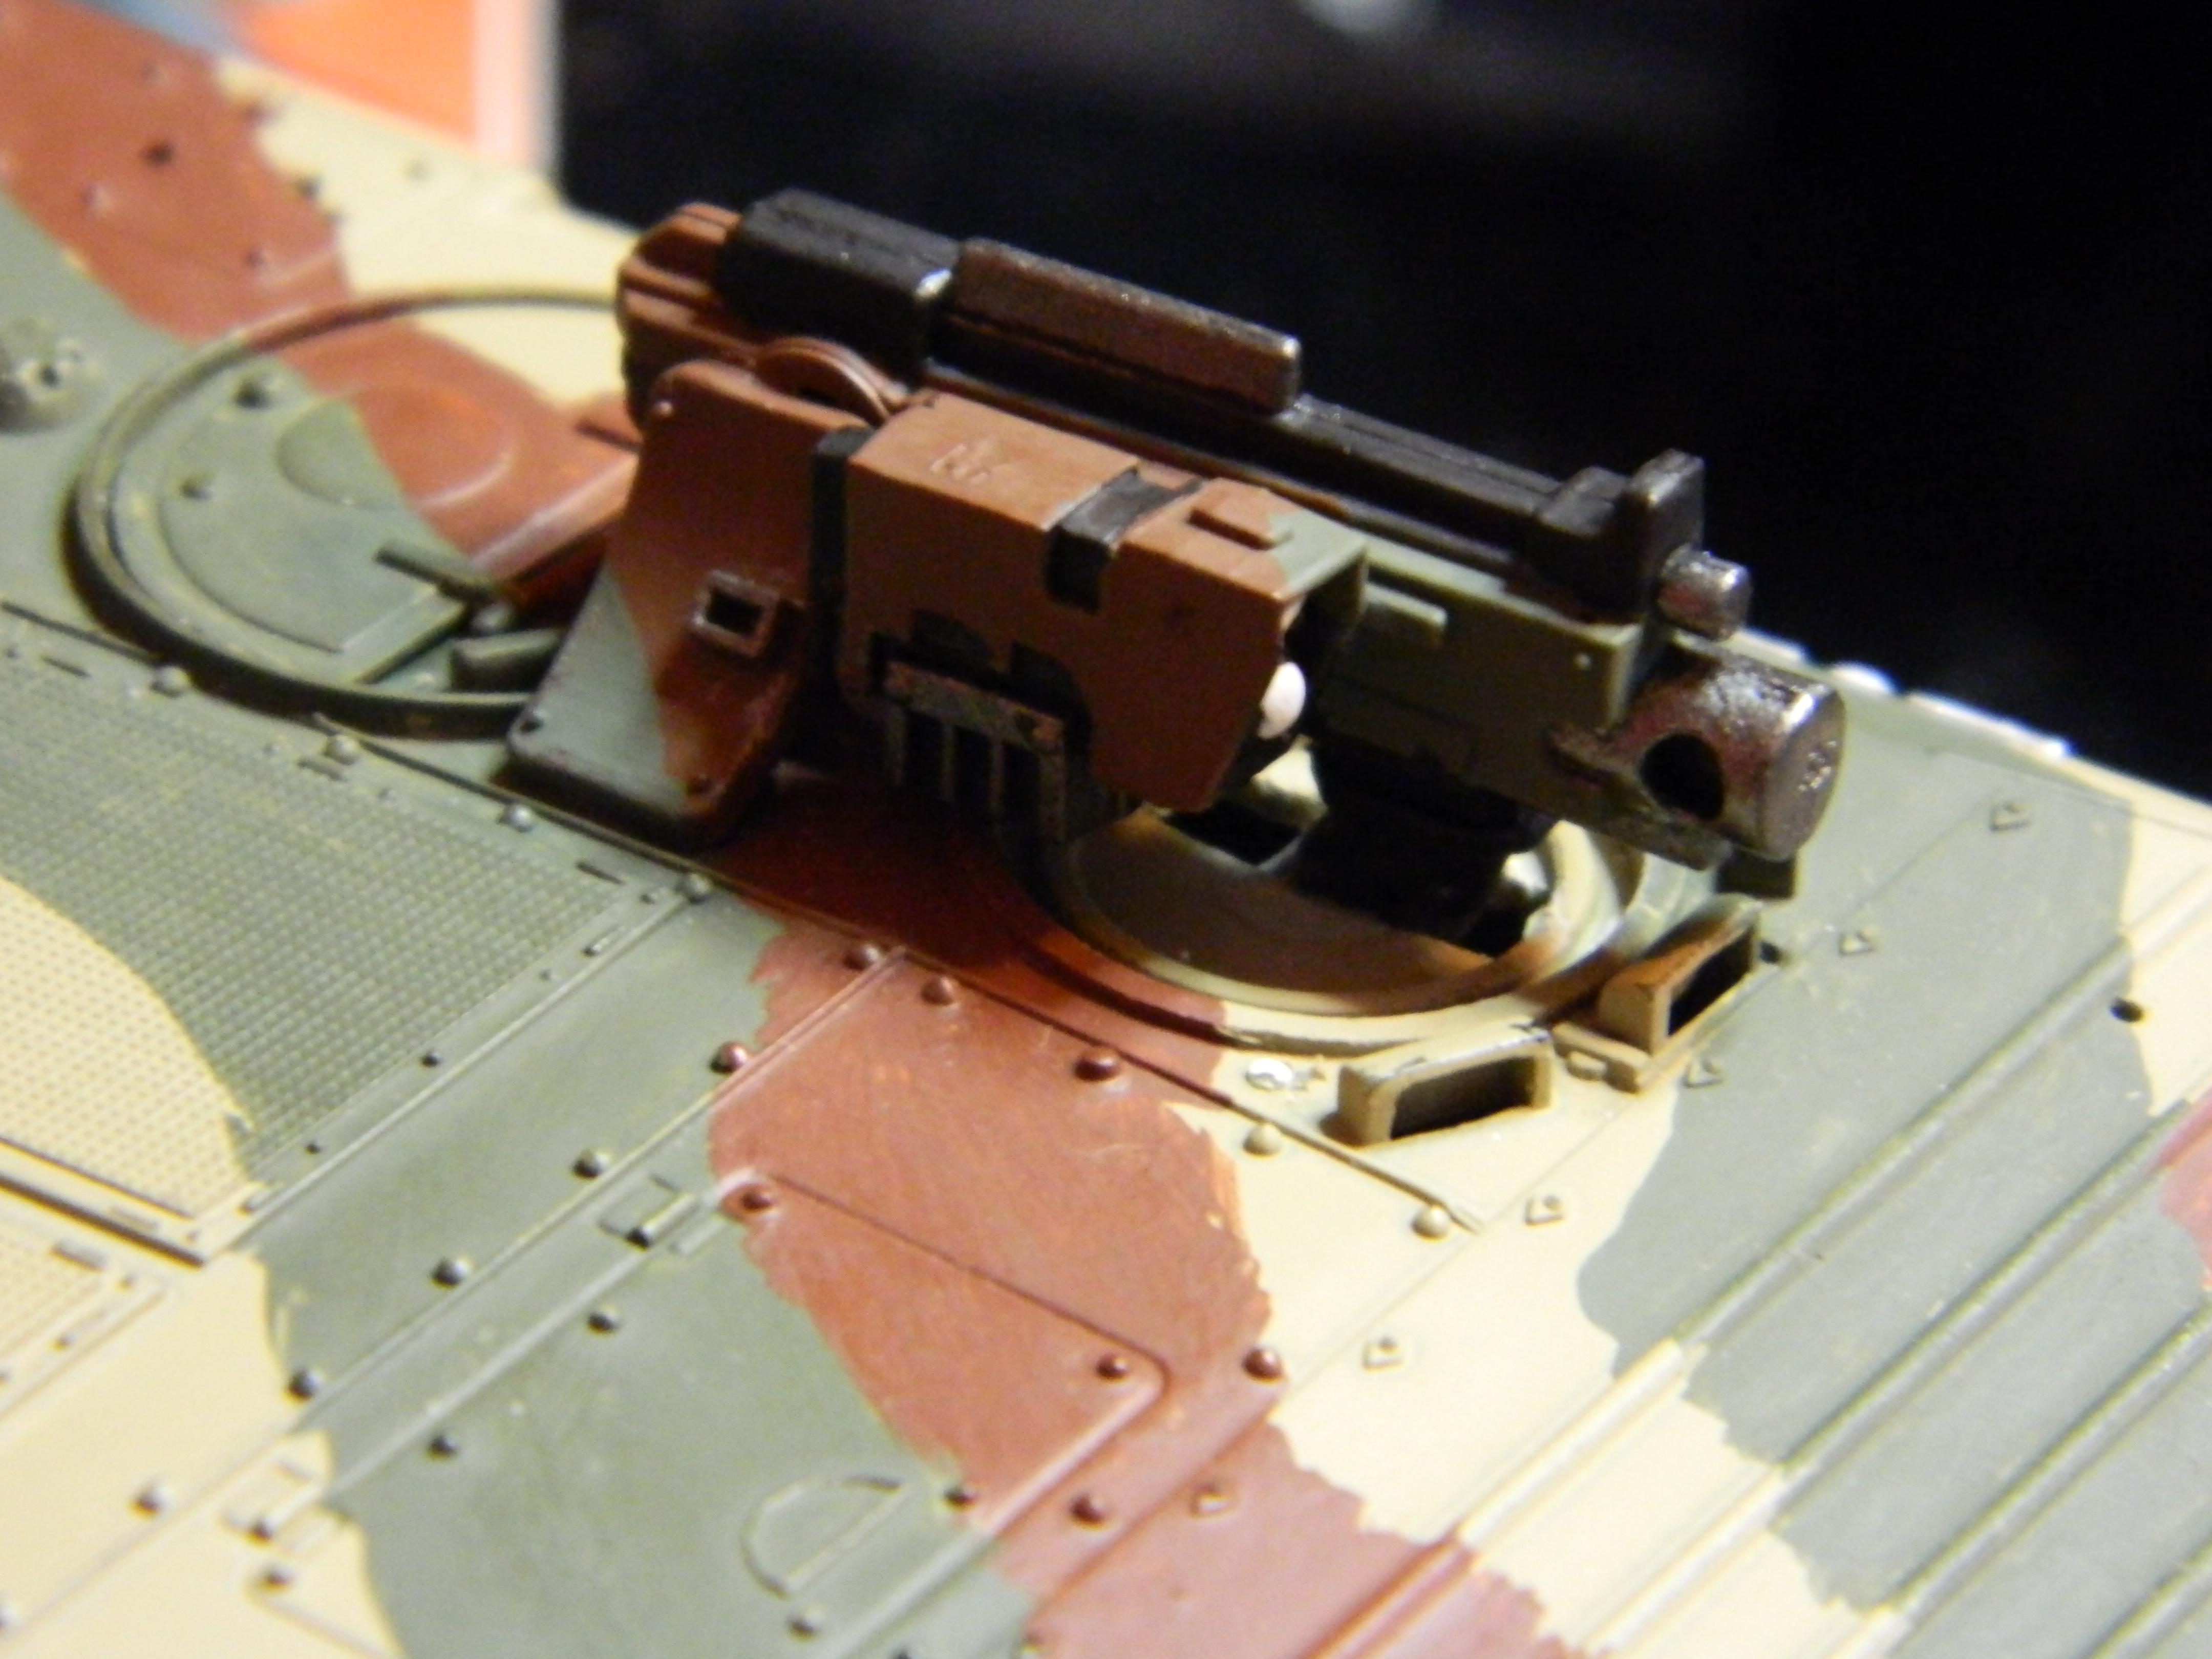 the Heavy Bolter is painted as well